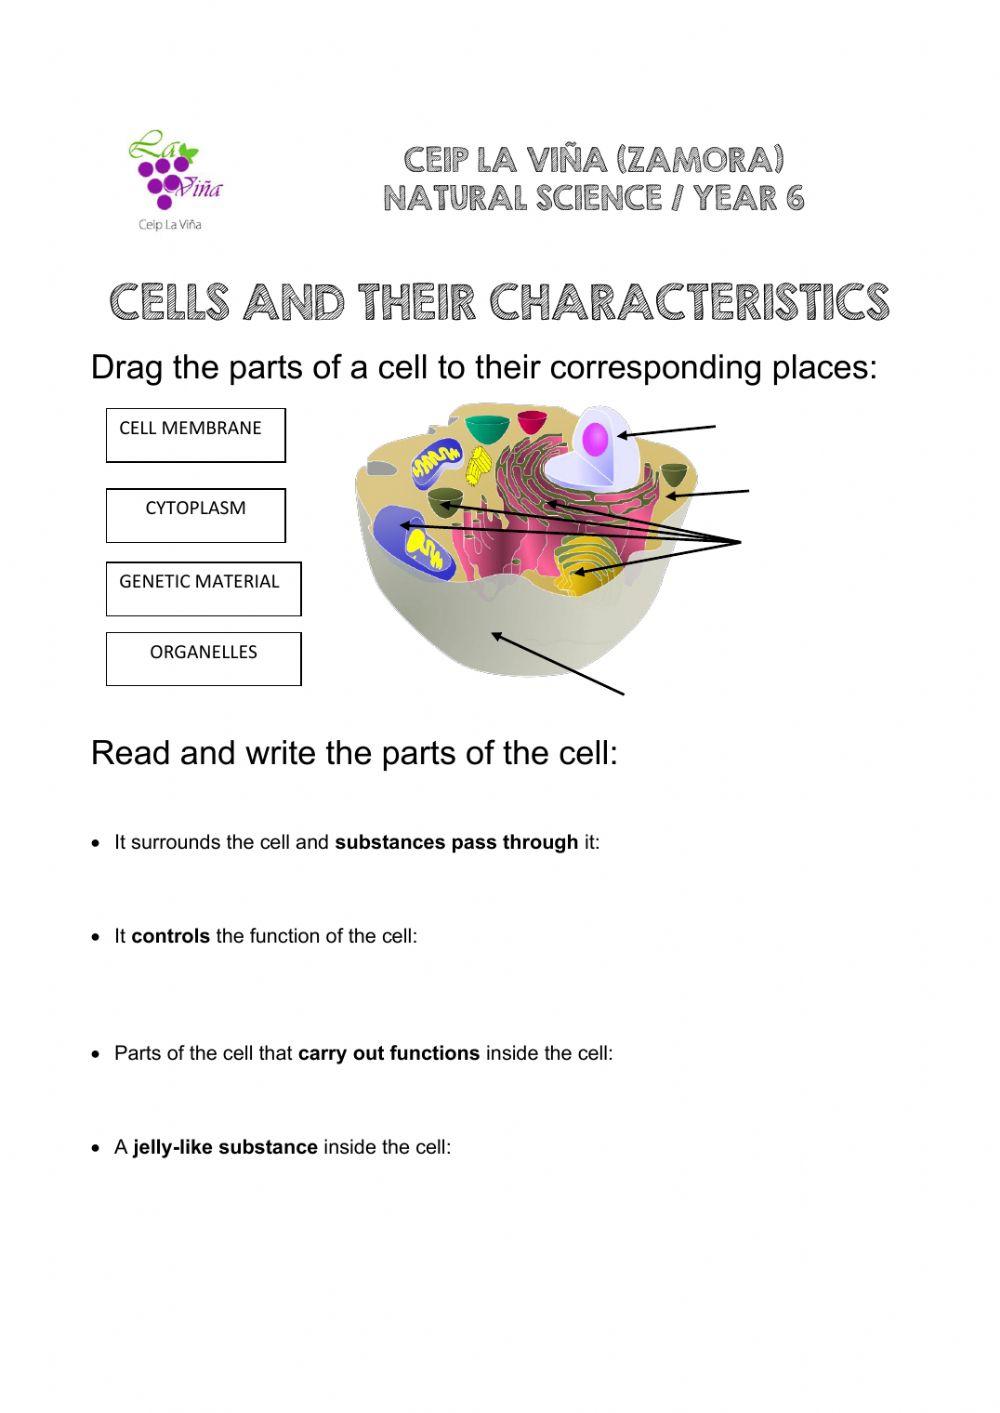 Cells and their characteristics